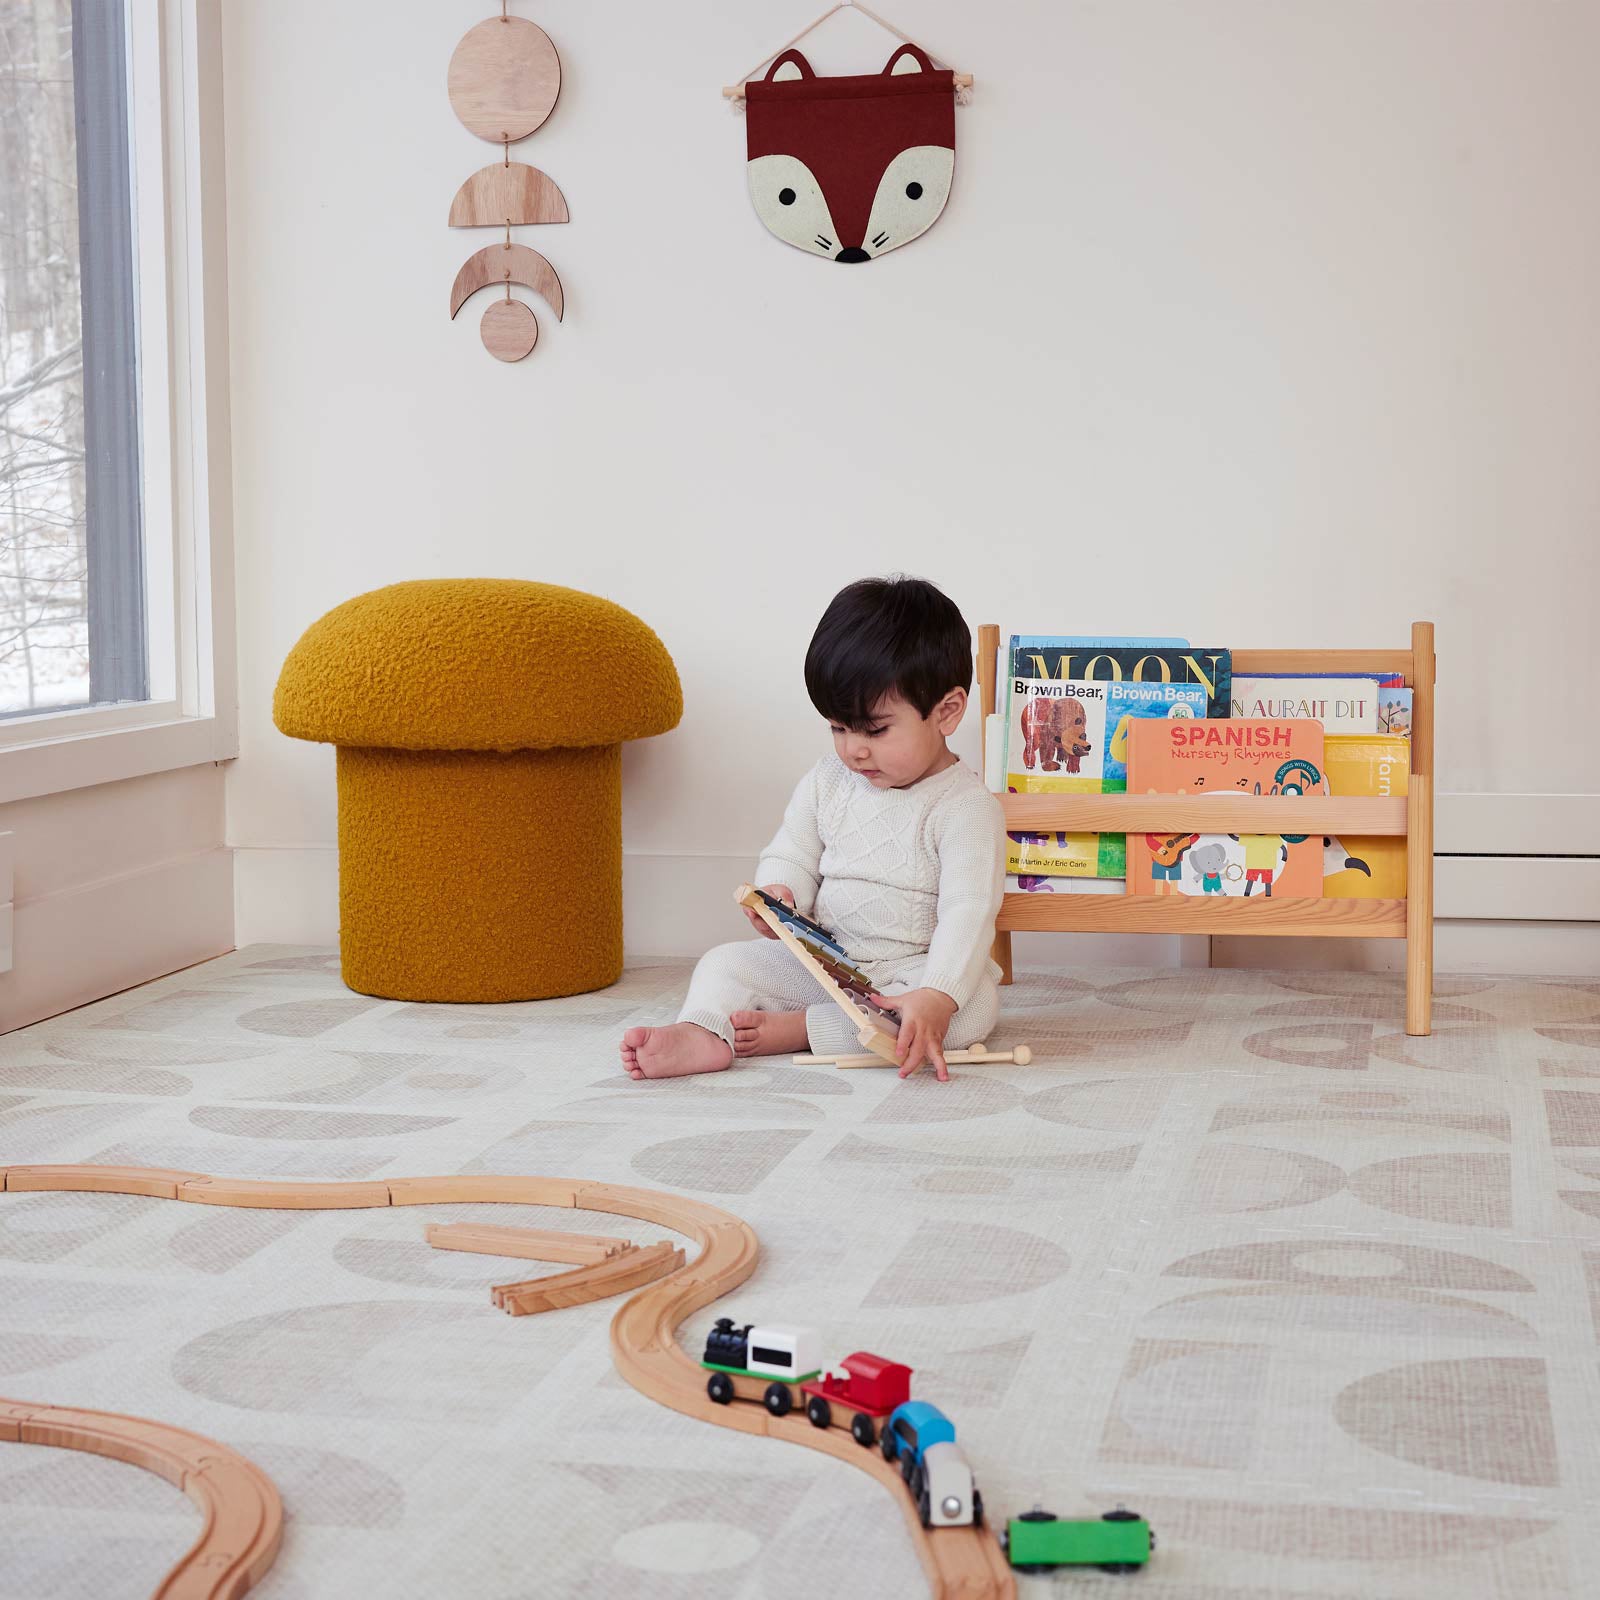 Luna sandstone neutral geometric print play mat shown in play room with wooden train track toys, mustard mushroom ottoman in the corner and baby boy sitting by a wooden bookstand opening a book